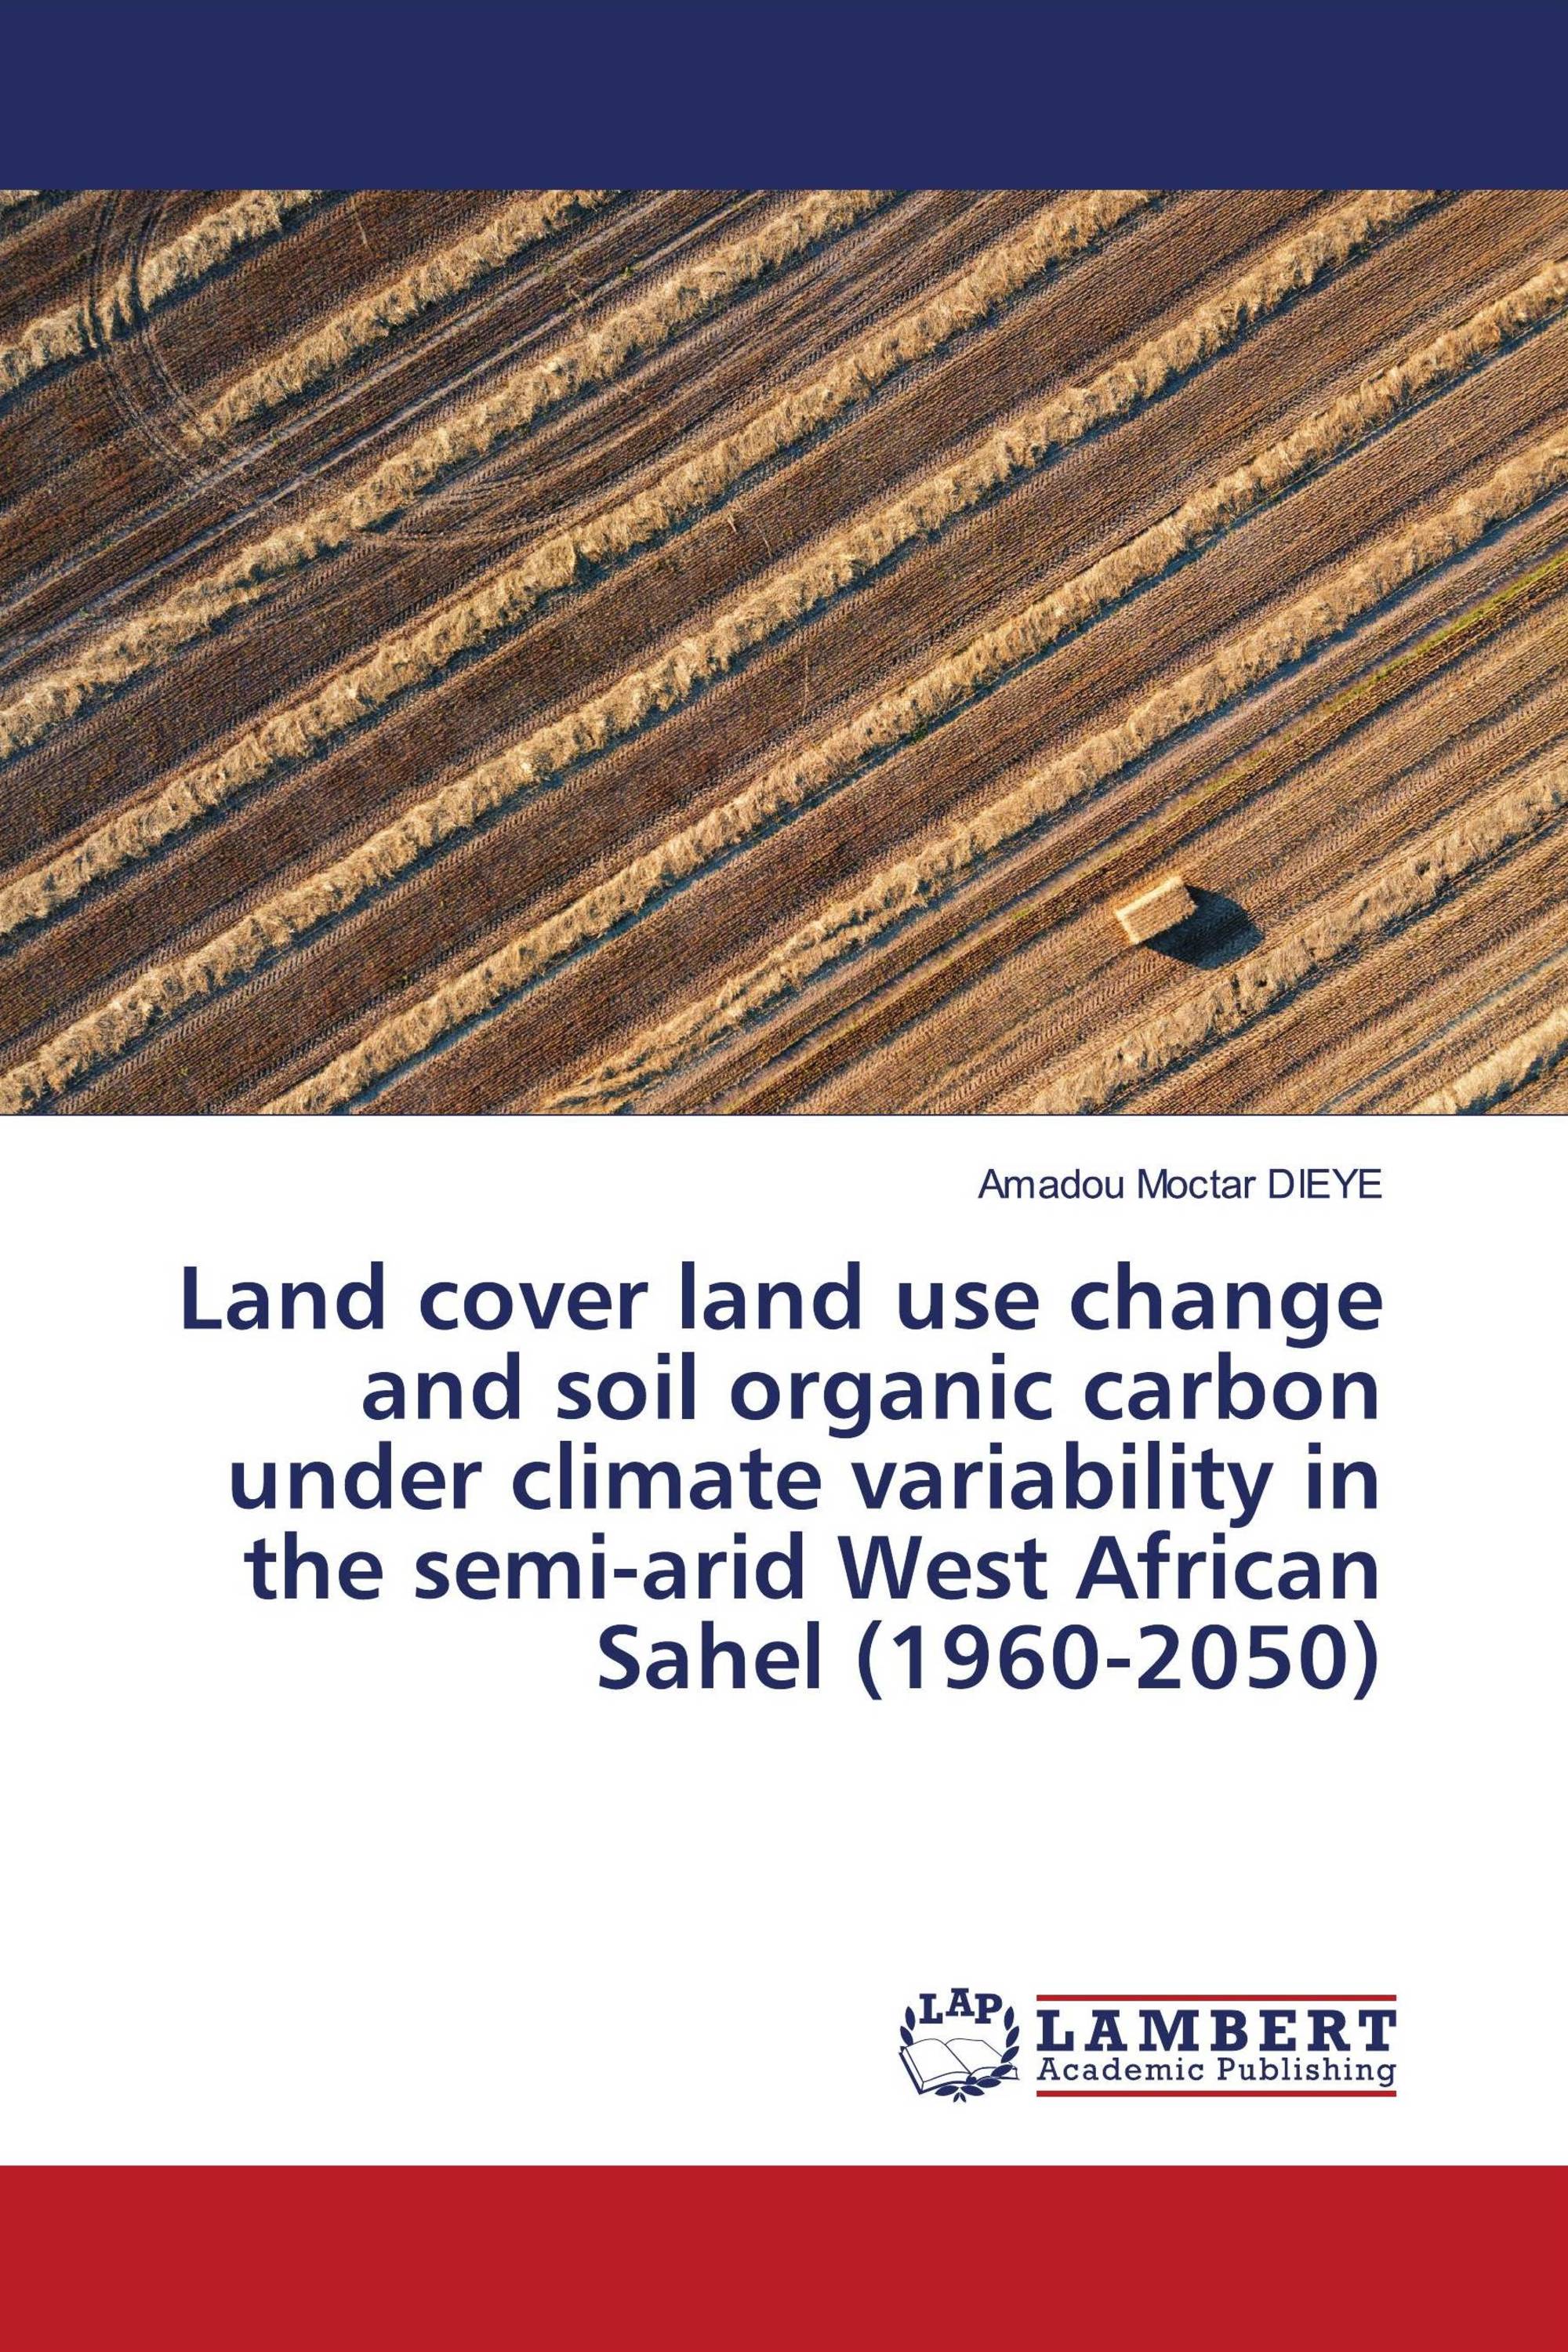 Land cover land use change and soil organic carbon under climate variability in the semi-arid West African Sahel (1960-2050)